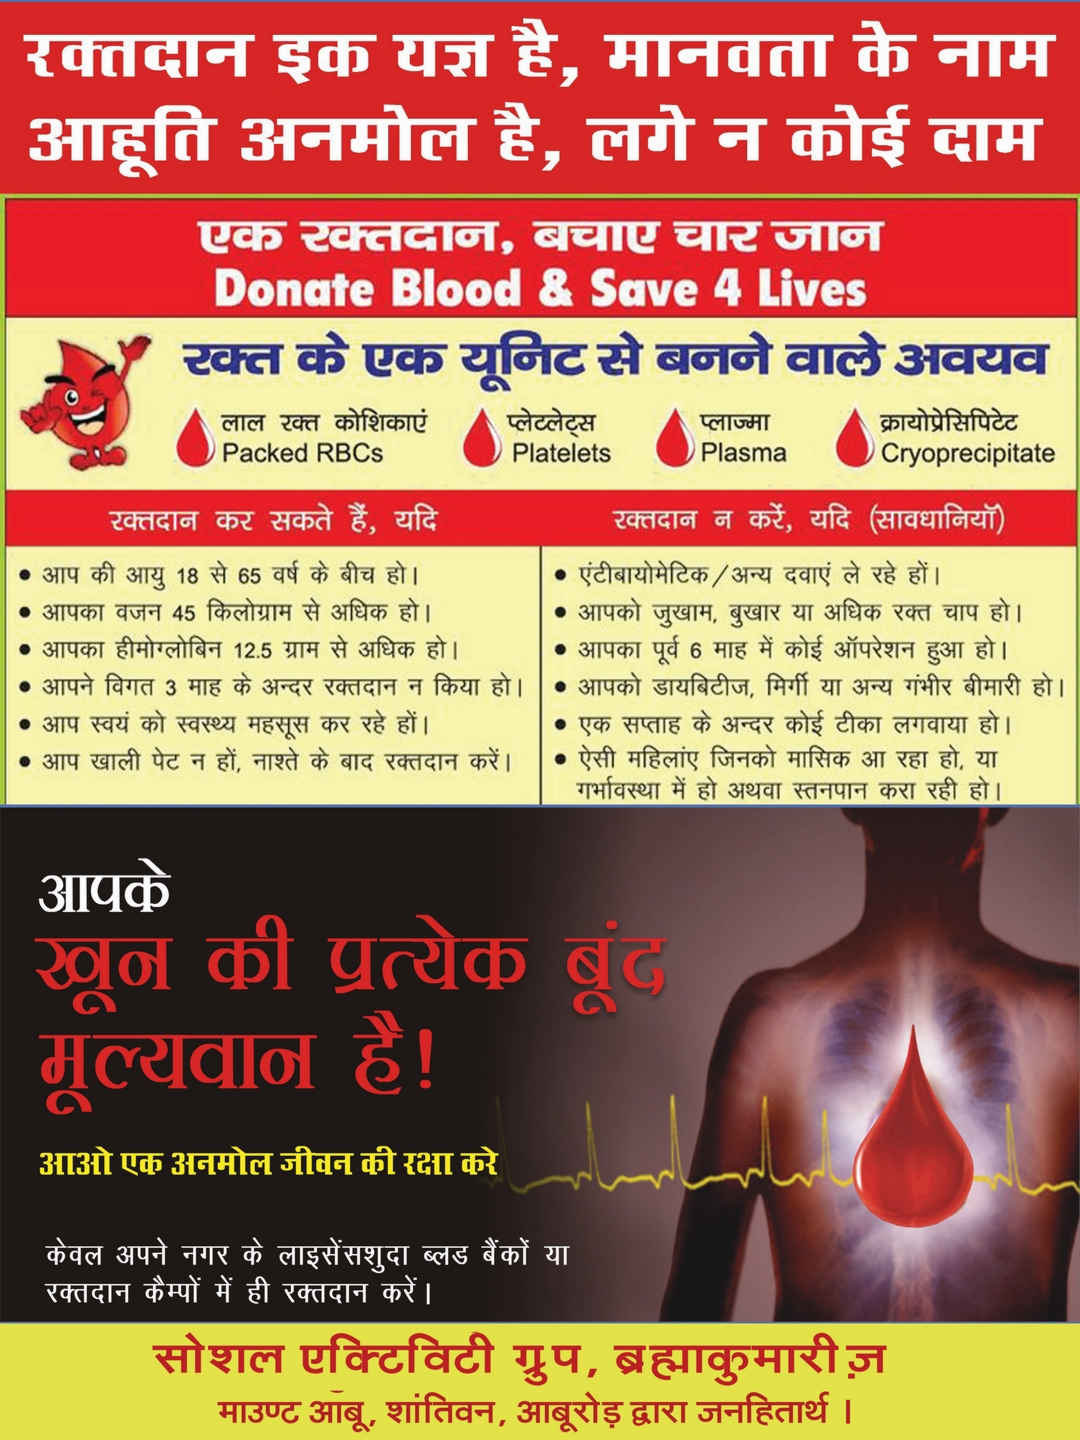 Donate Blood & Save Lives